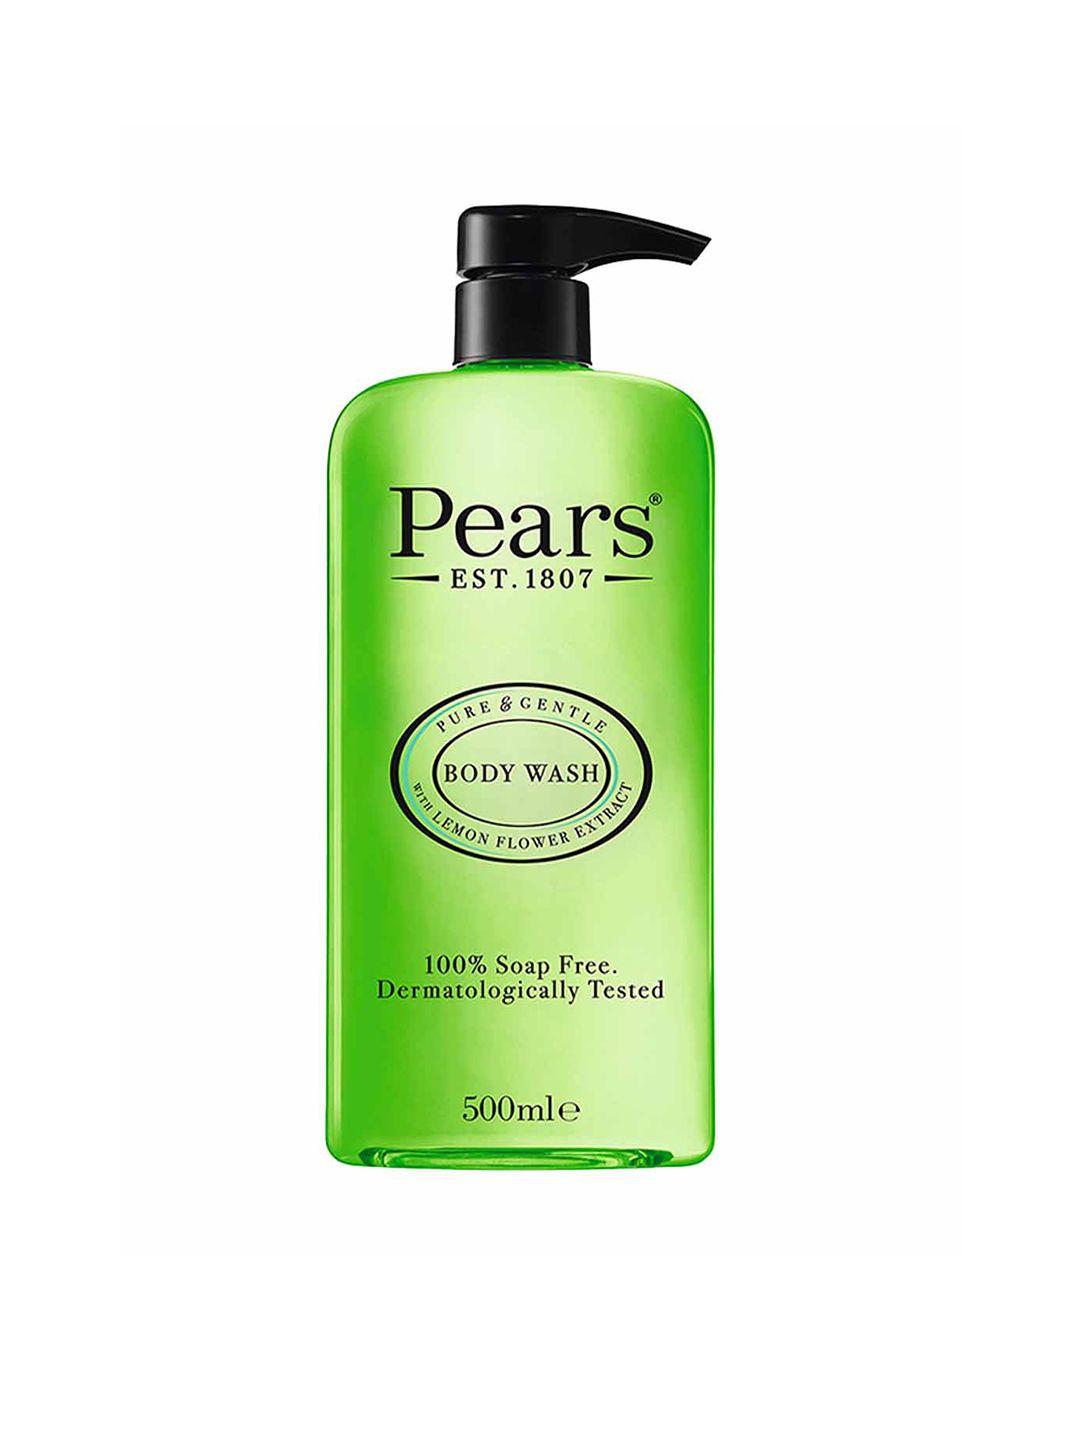 pears-pure-&-gentle-body-wash-with-lemon-flower-extract-500-ml